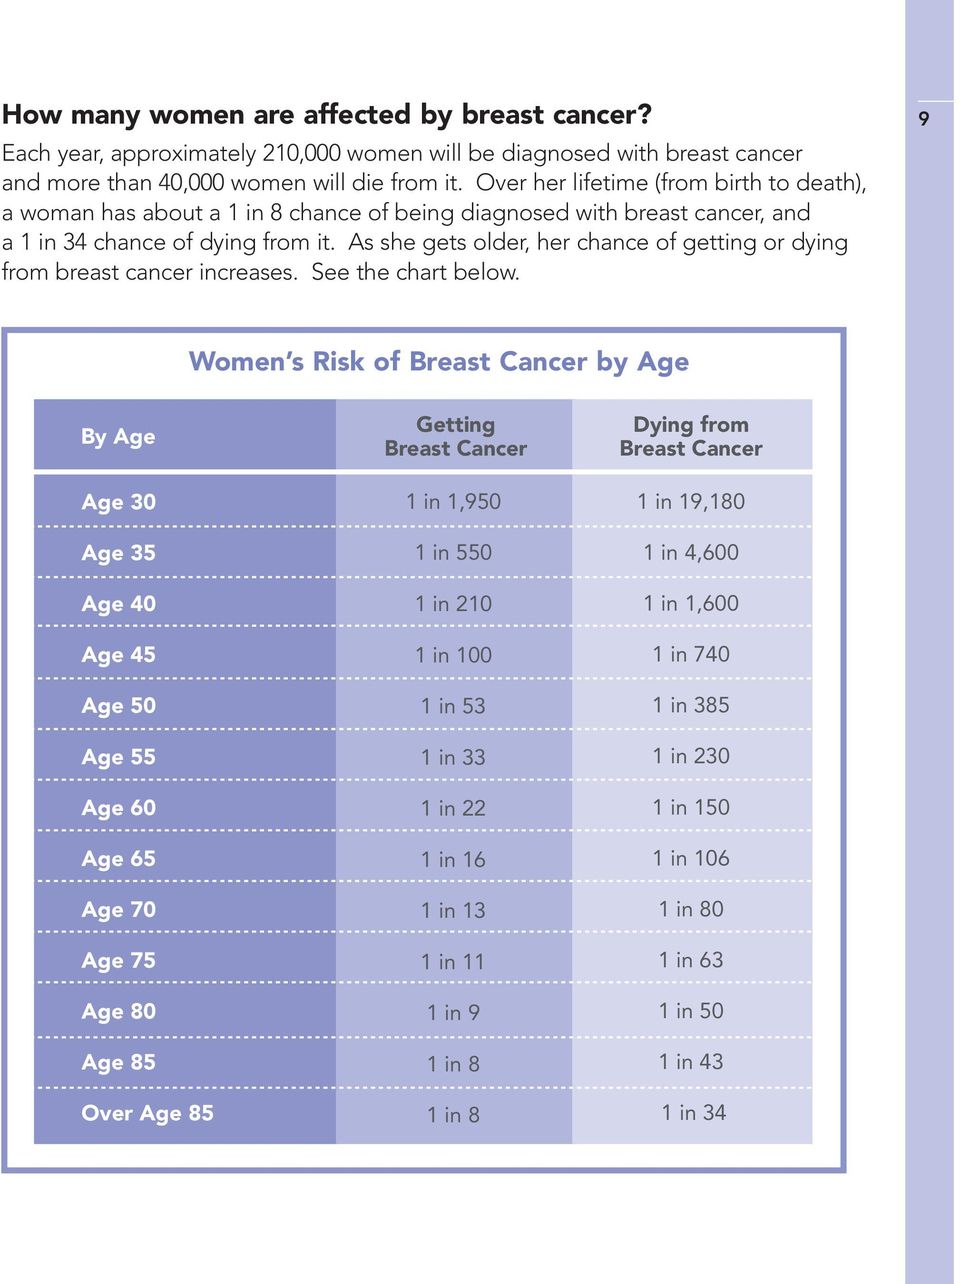 As she gets older, her chance of getting or dying from breast cancer increases. See the chart below.